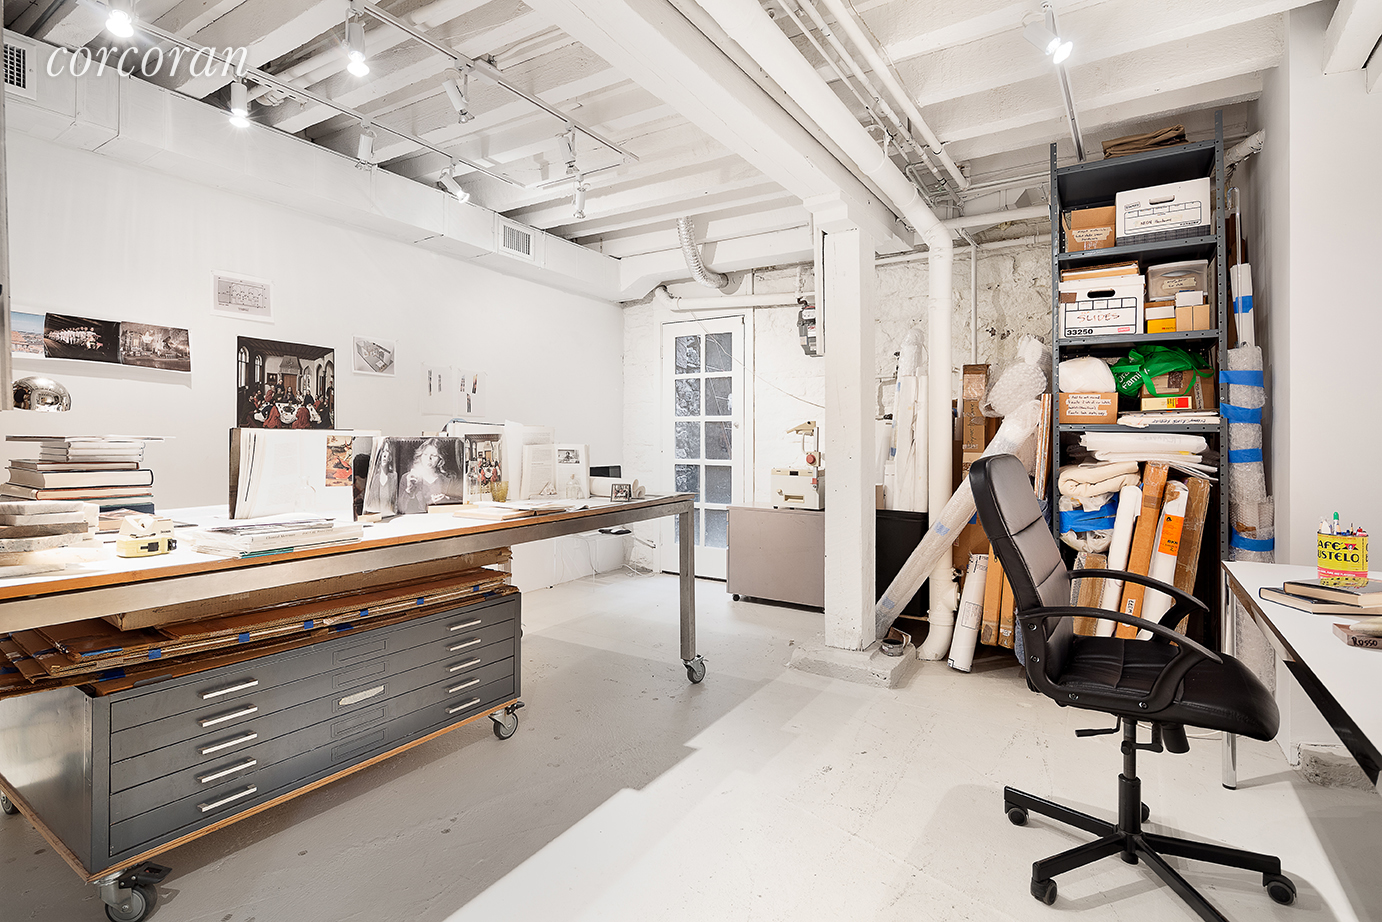 An added bonus is the basement level workshop which means the carriage house is an idea live/work space